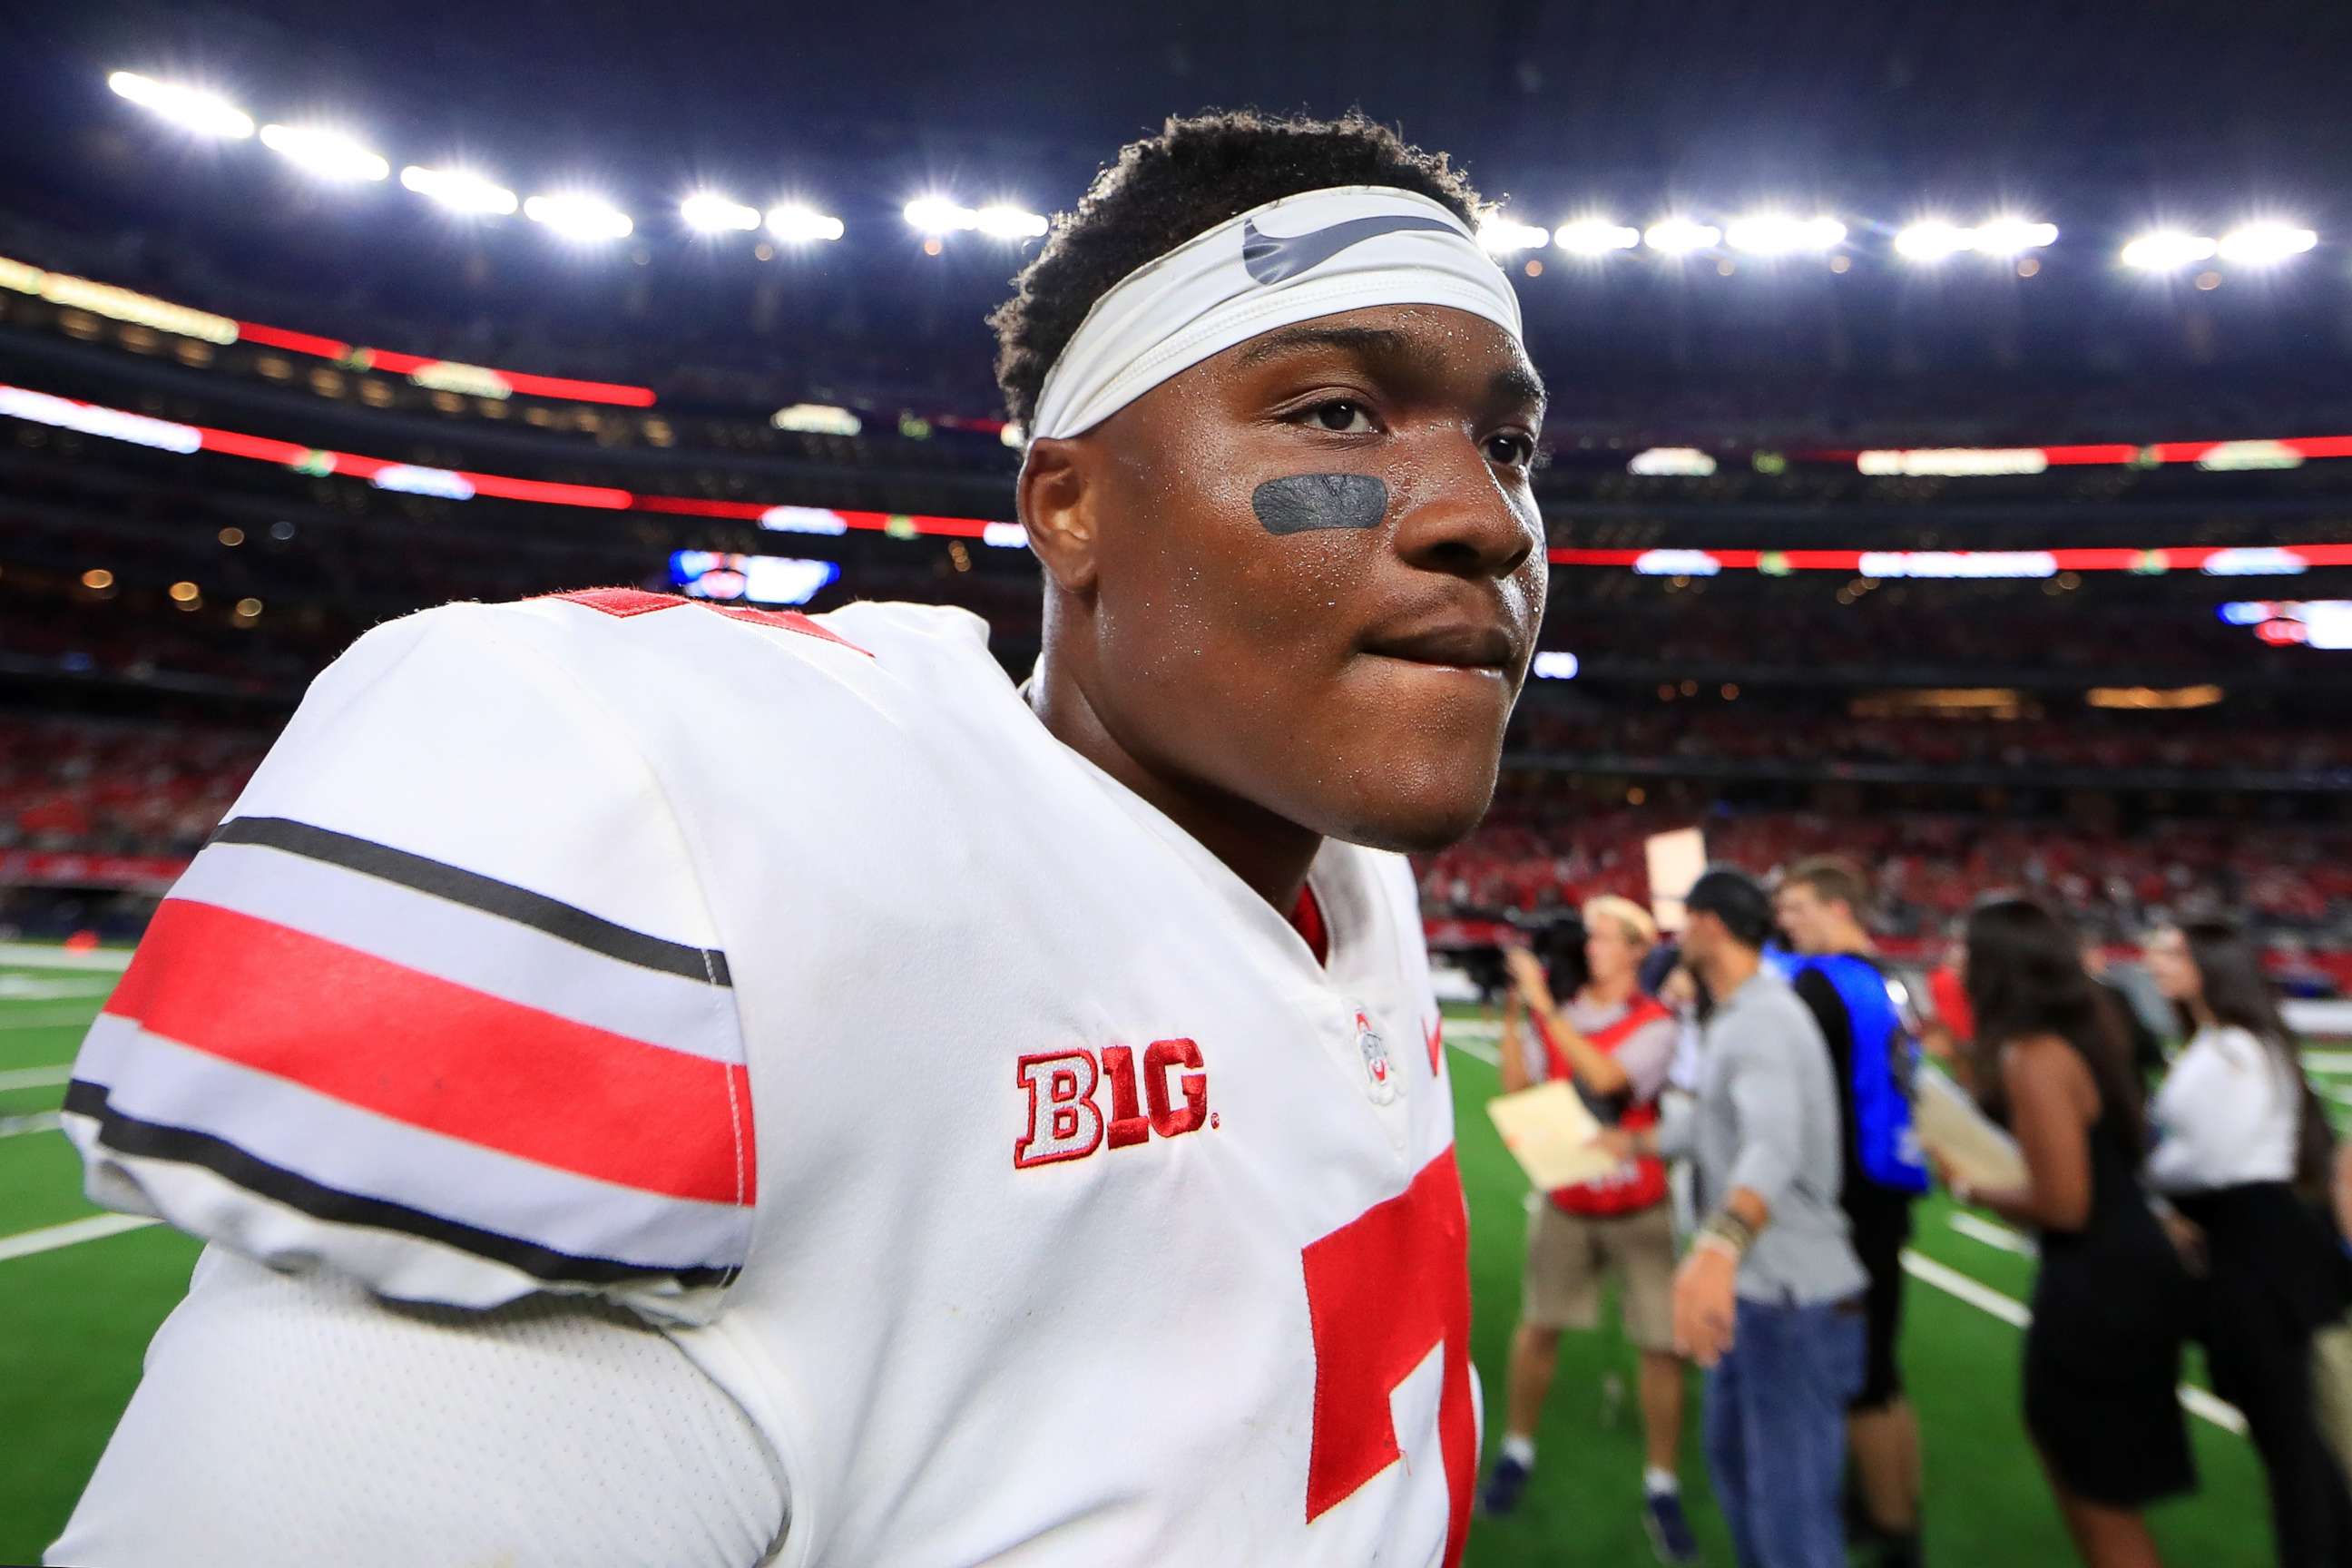 PHOTO: Dwayne Haskins of the Ohio State Buckeyes walks off the field after beating the TCU Horned Frogs 40-28 at AT&T Stadium on Sept. 15, 2018 in Arlington, Texas.